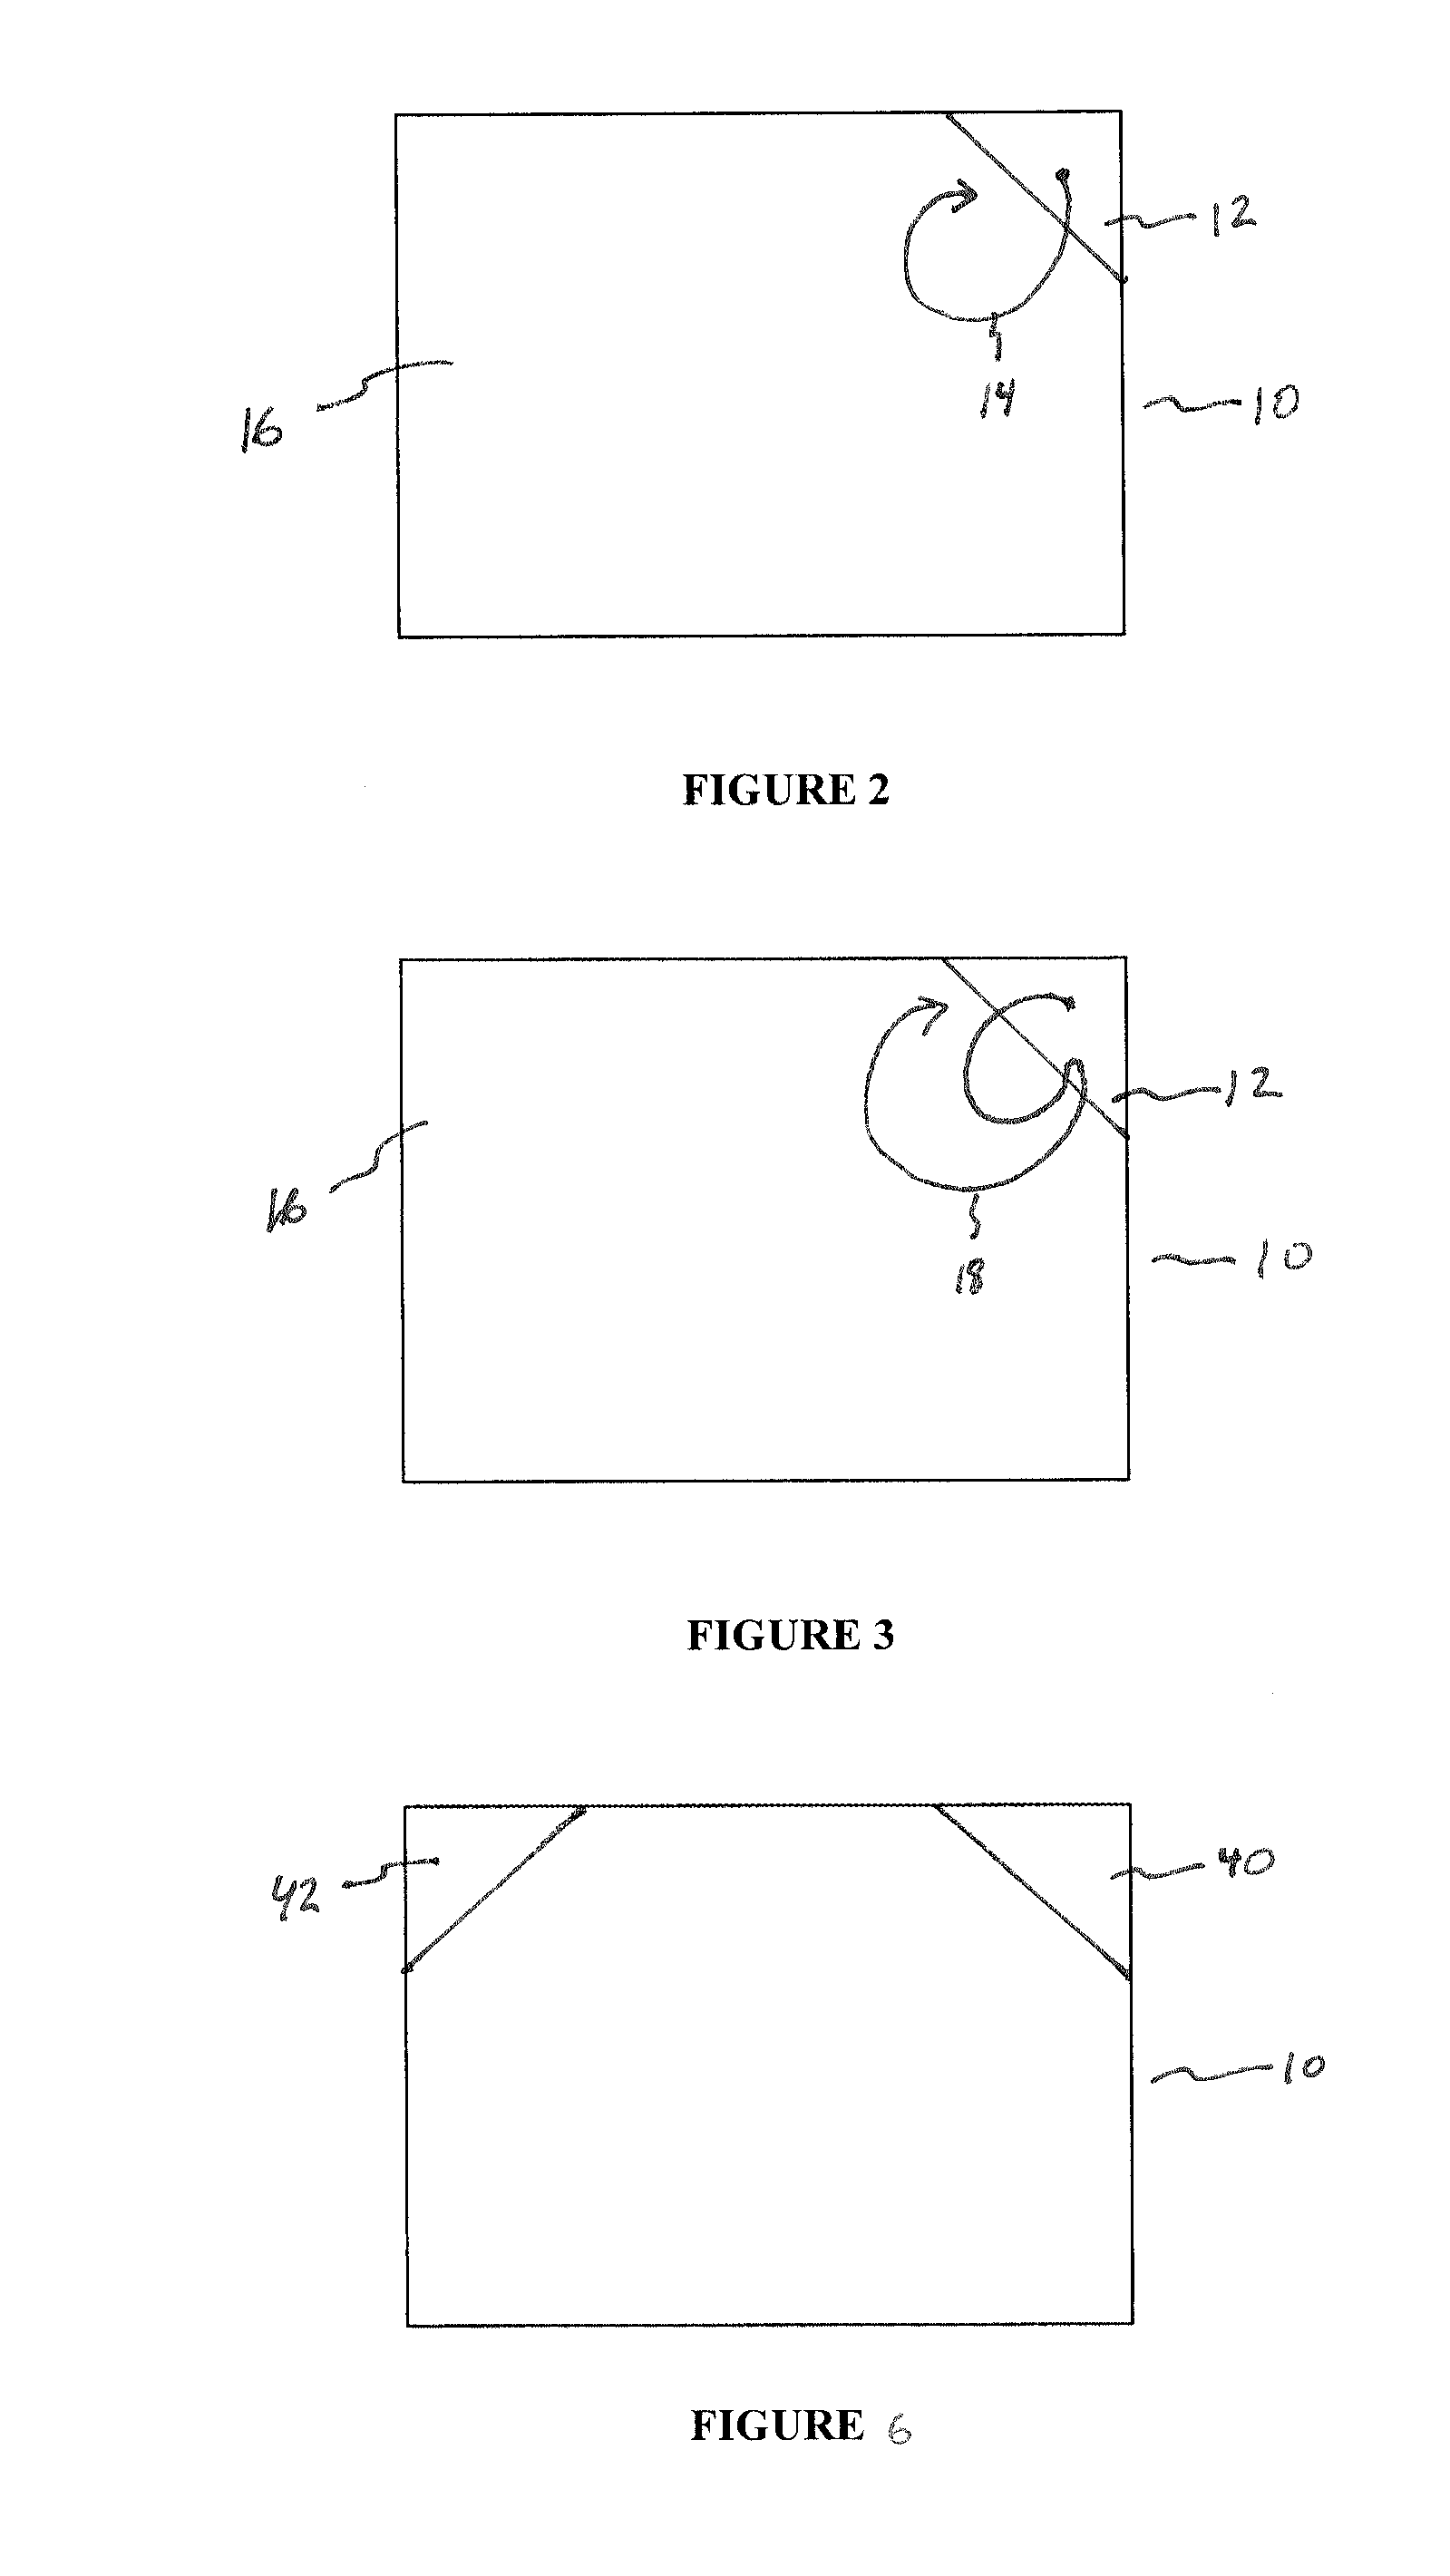 Method of scrolling that is activated by touchdown in a predefined location on a touchpad that recognizes gestures for controlling scrolling functions